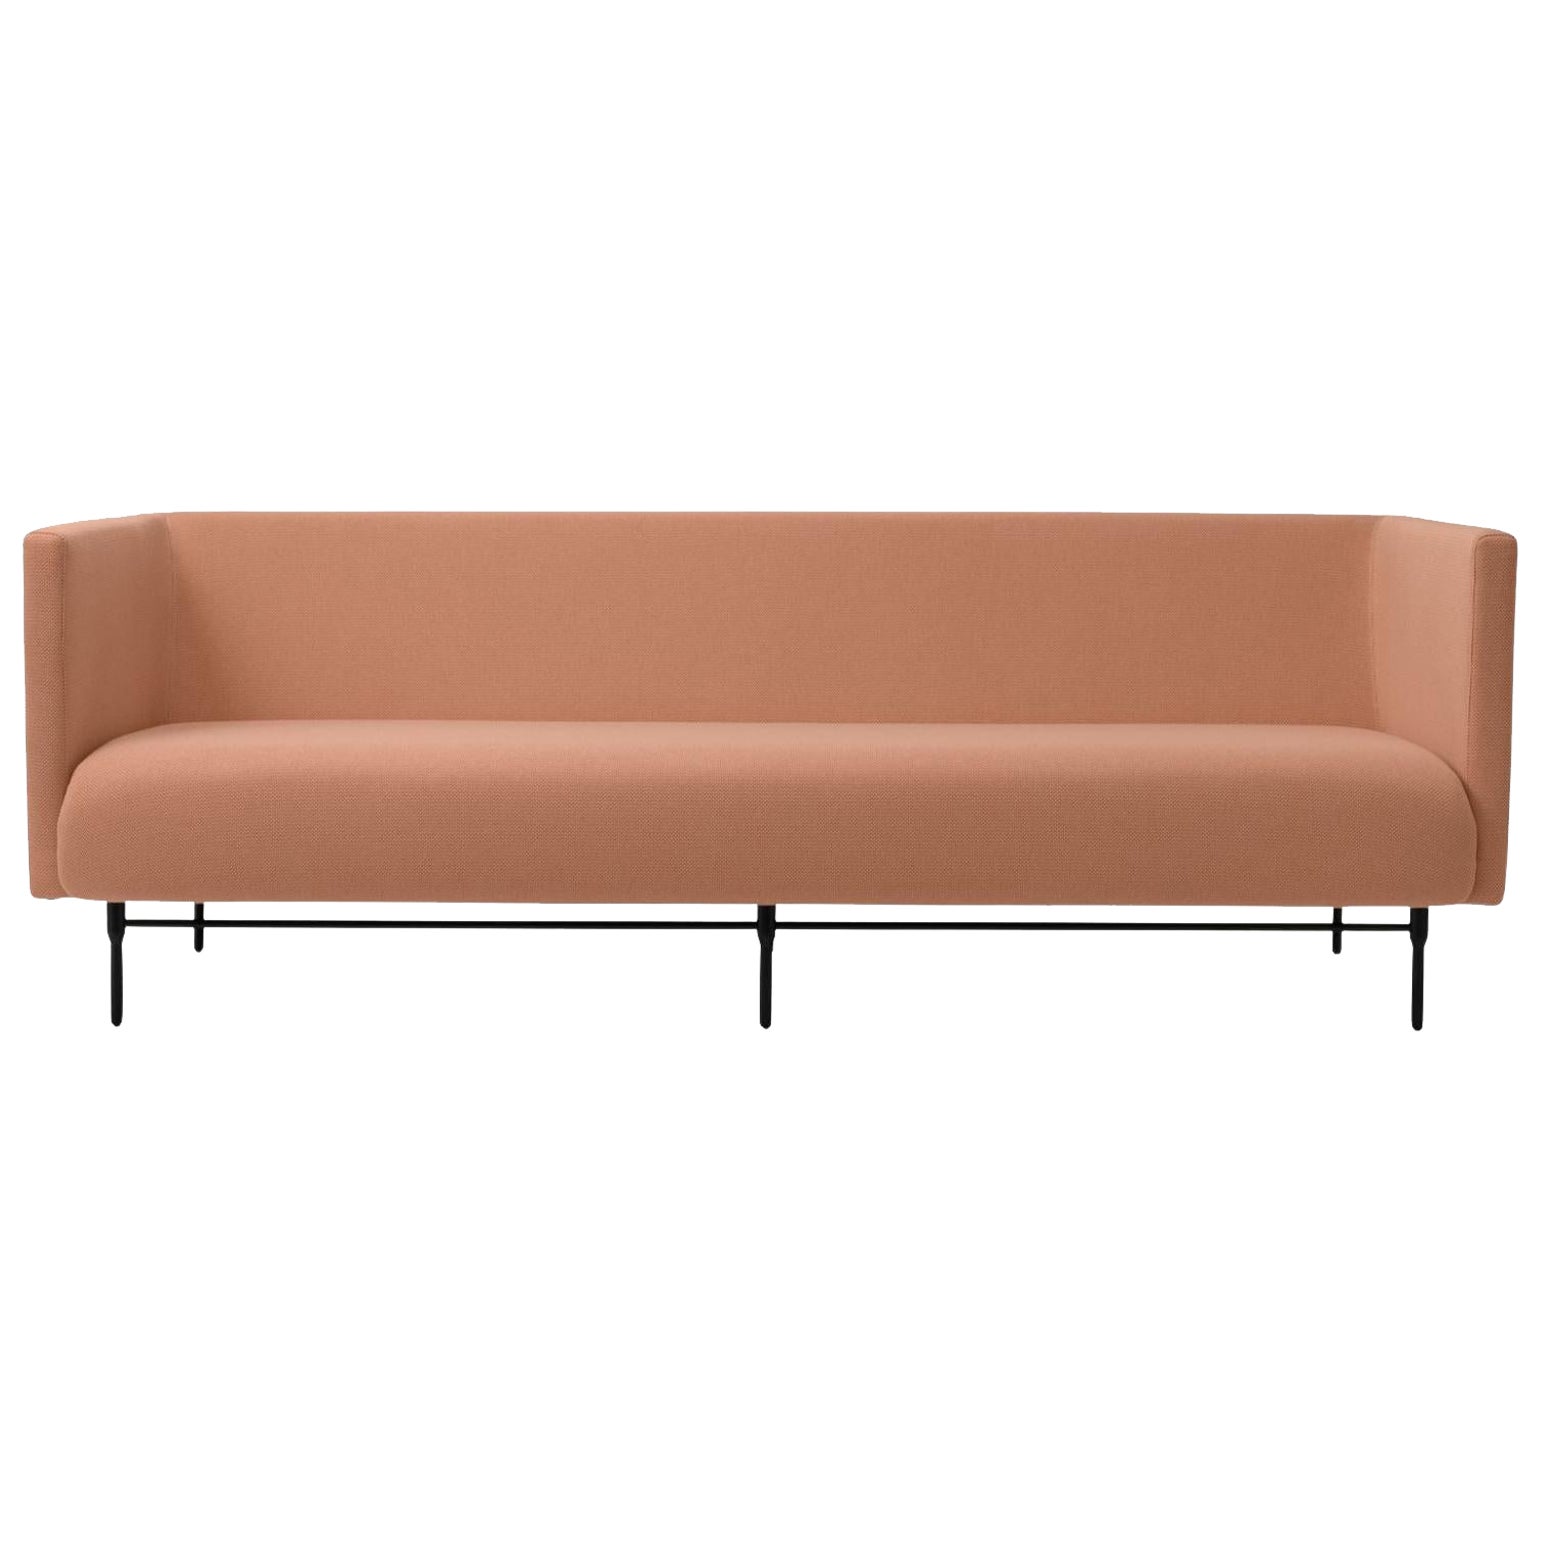 Galore 3 Seater Fresh Peach by Warm Nordic